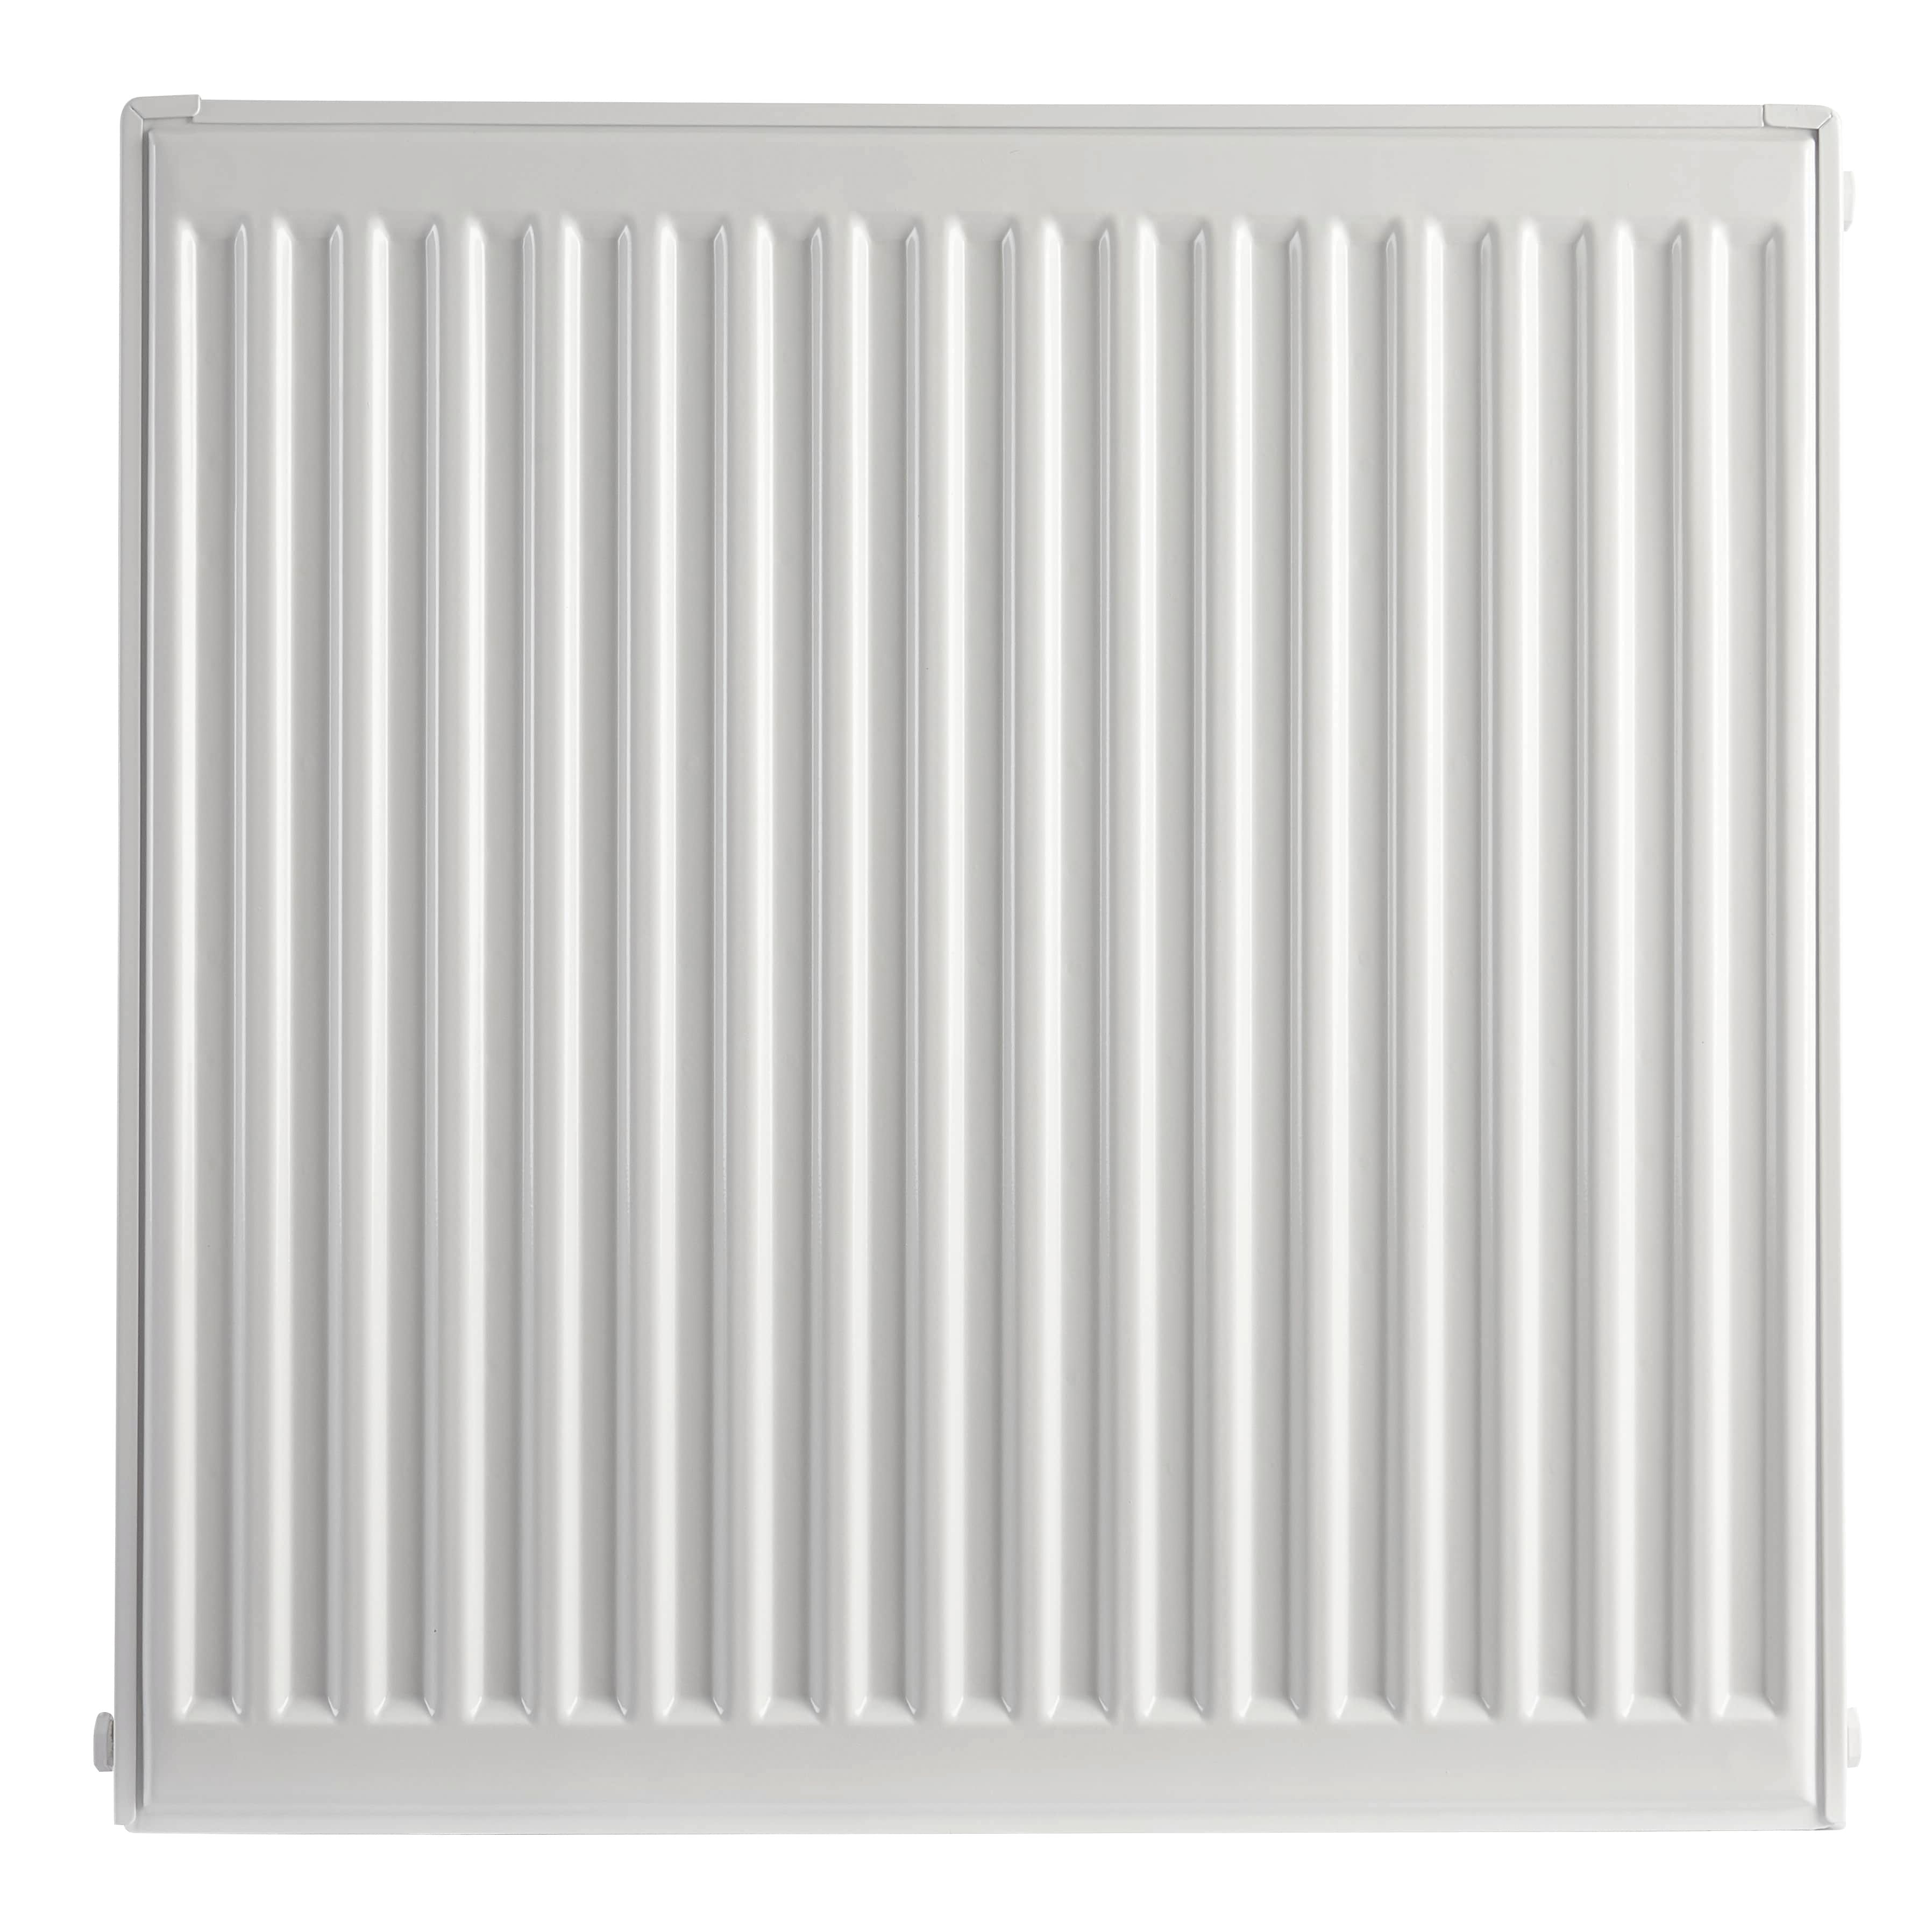 Image of Homeline by Stelrad 600 x 500mm Type 22 Double Panel Premium Double Convector Radiator